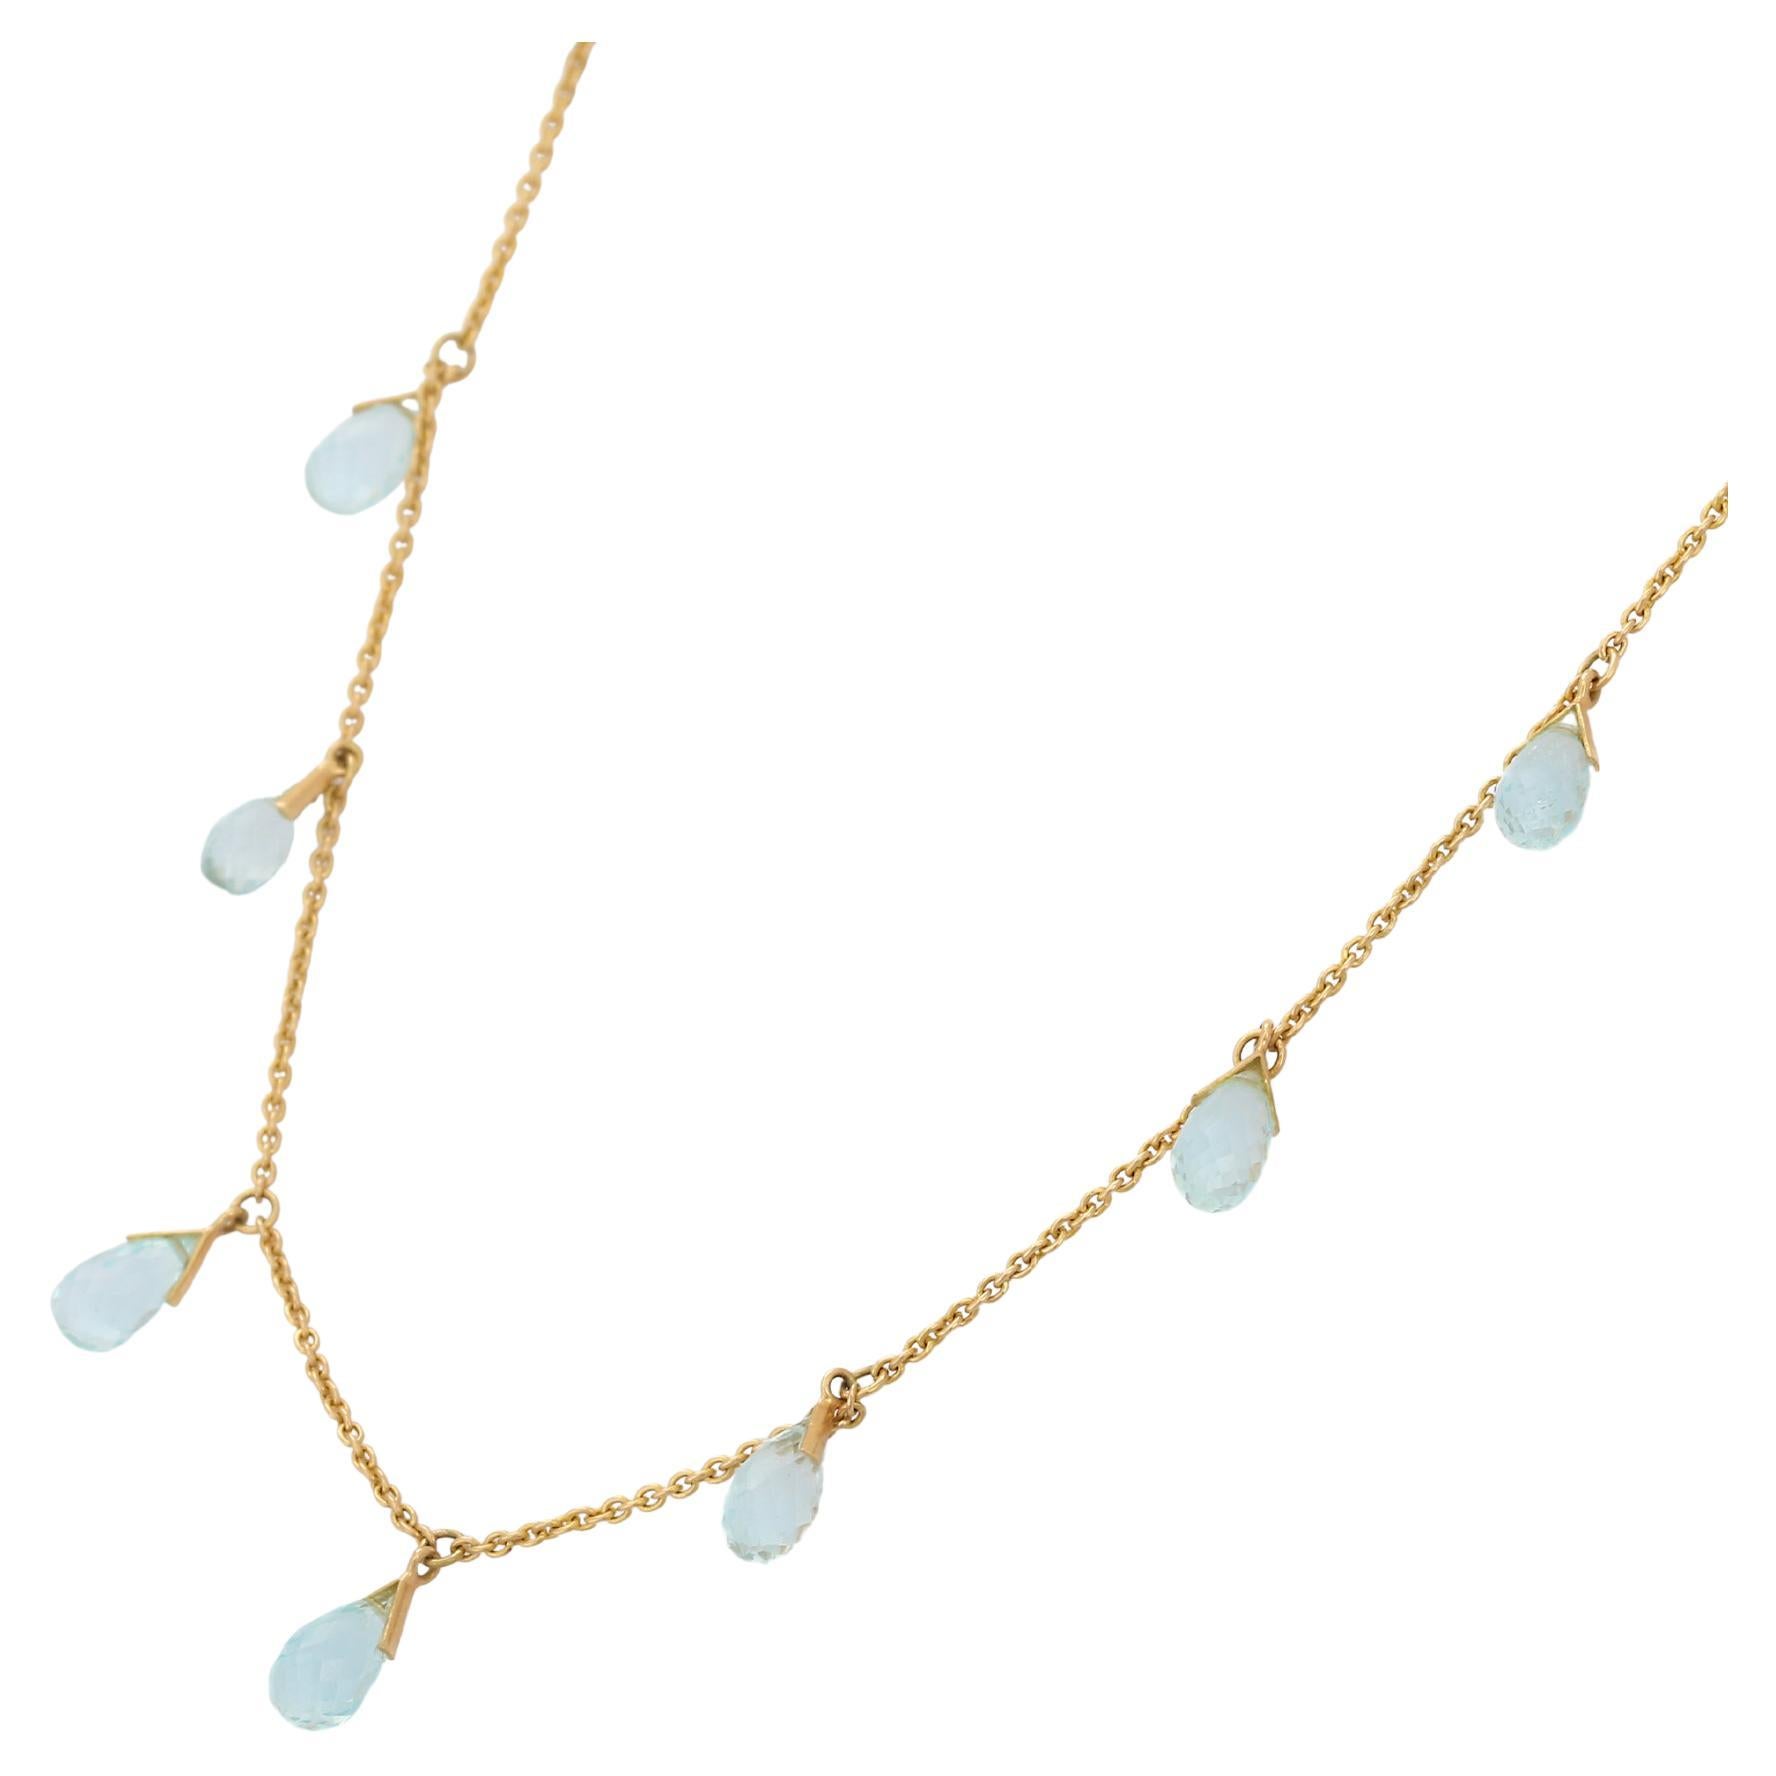 9.55 Carat Blue Topaz Drop Chain Necklace in 18K Yellow Gold